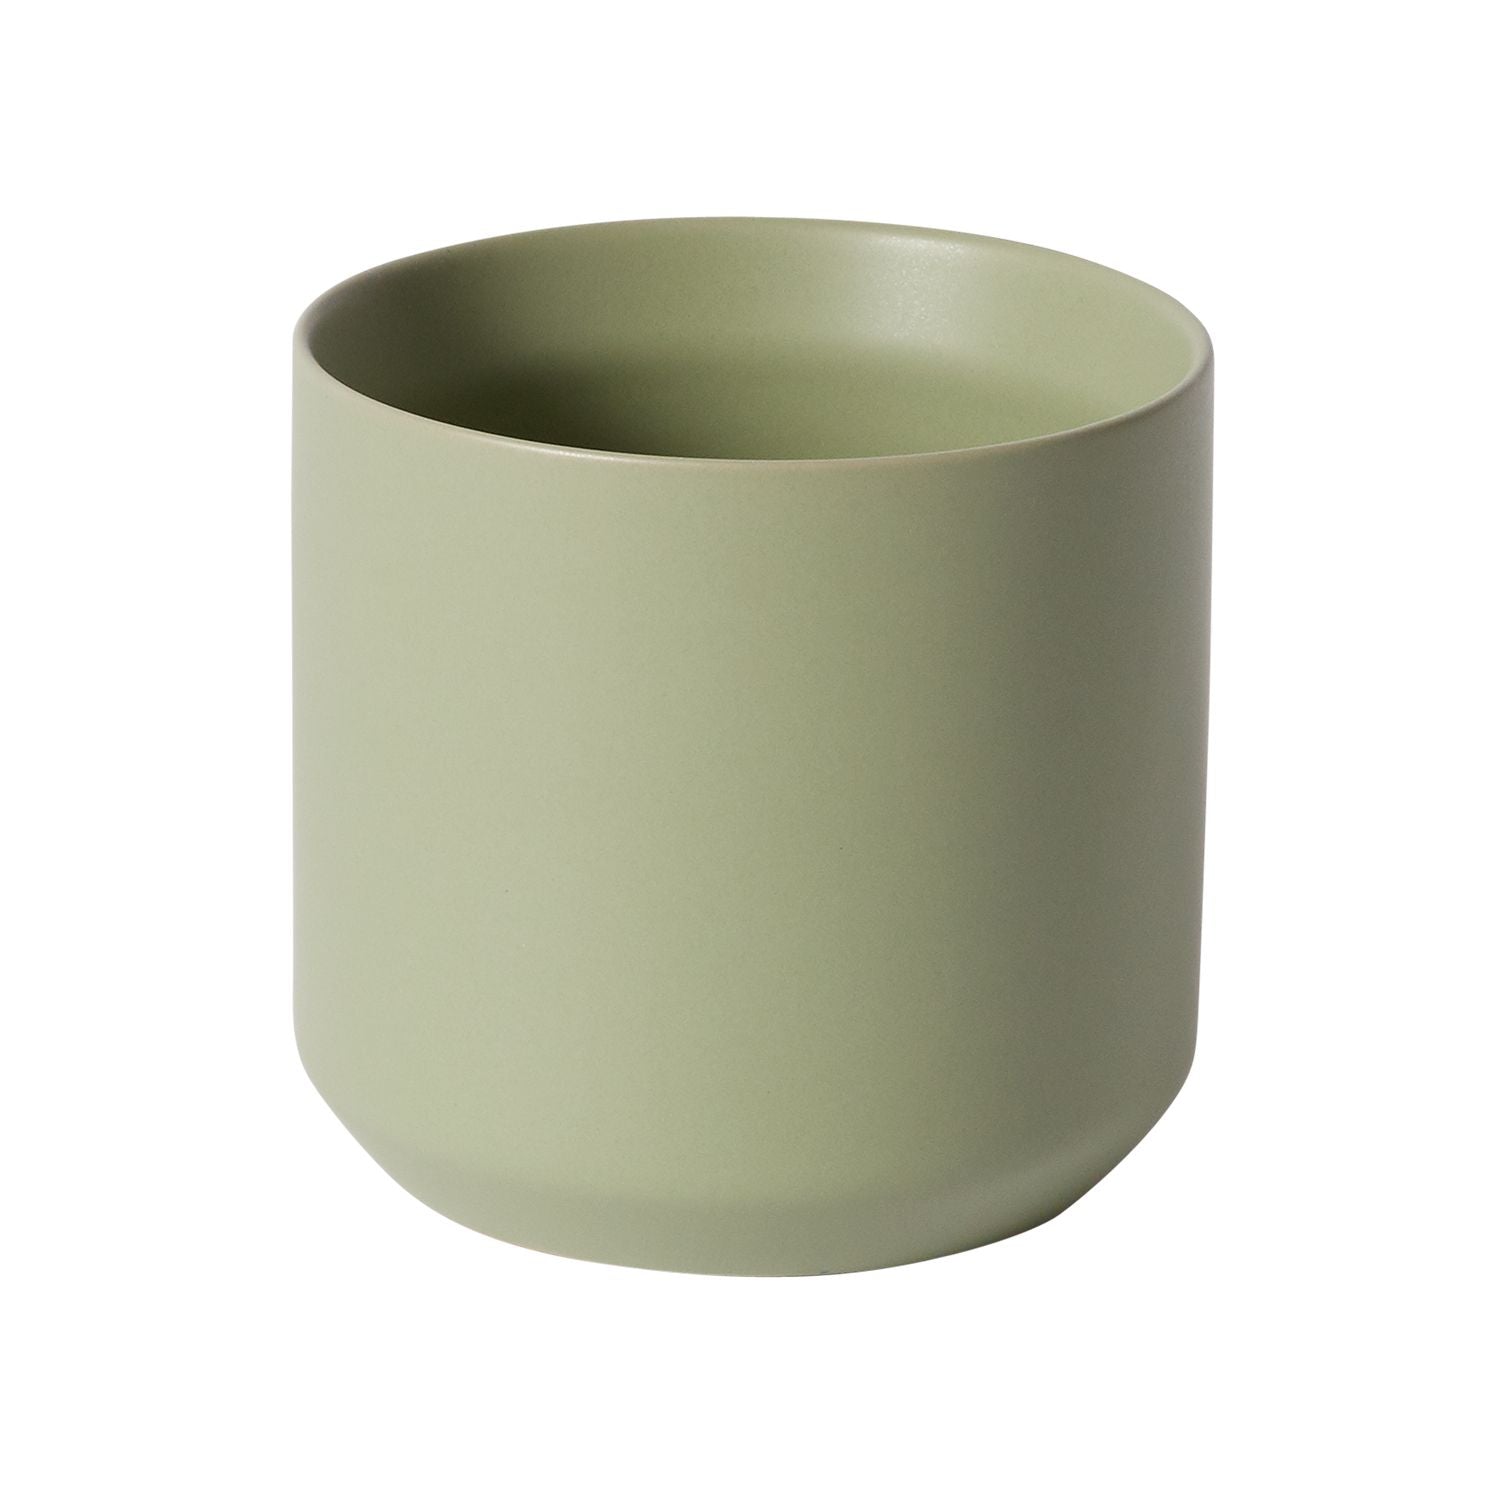 Kendall Pot in Green